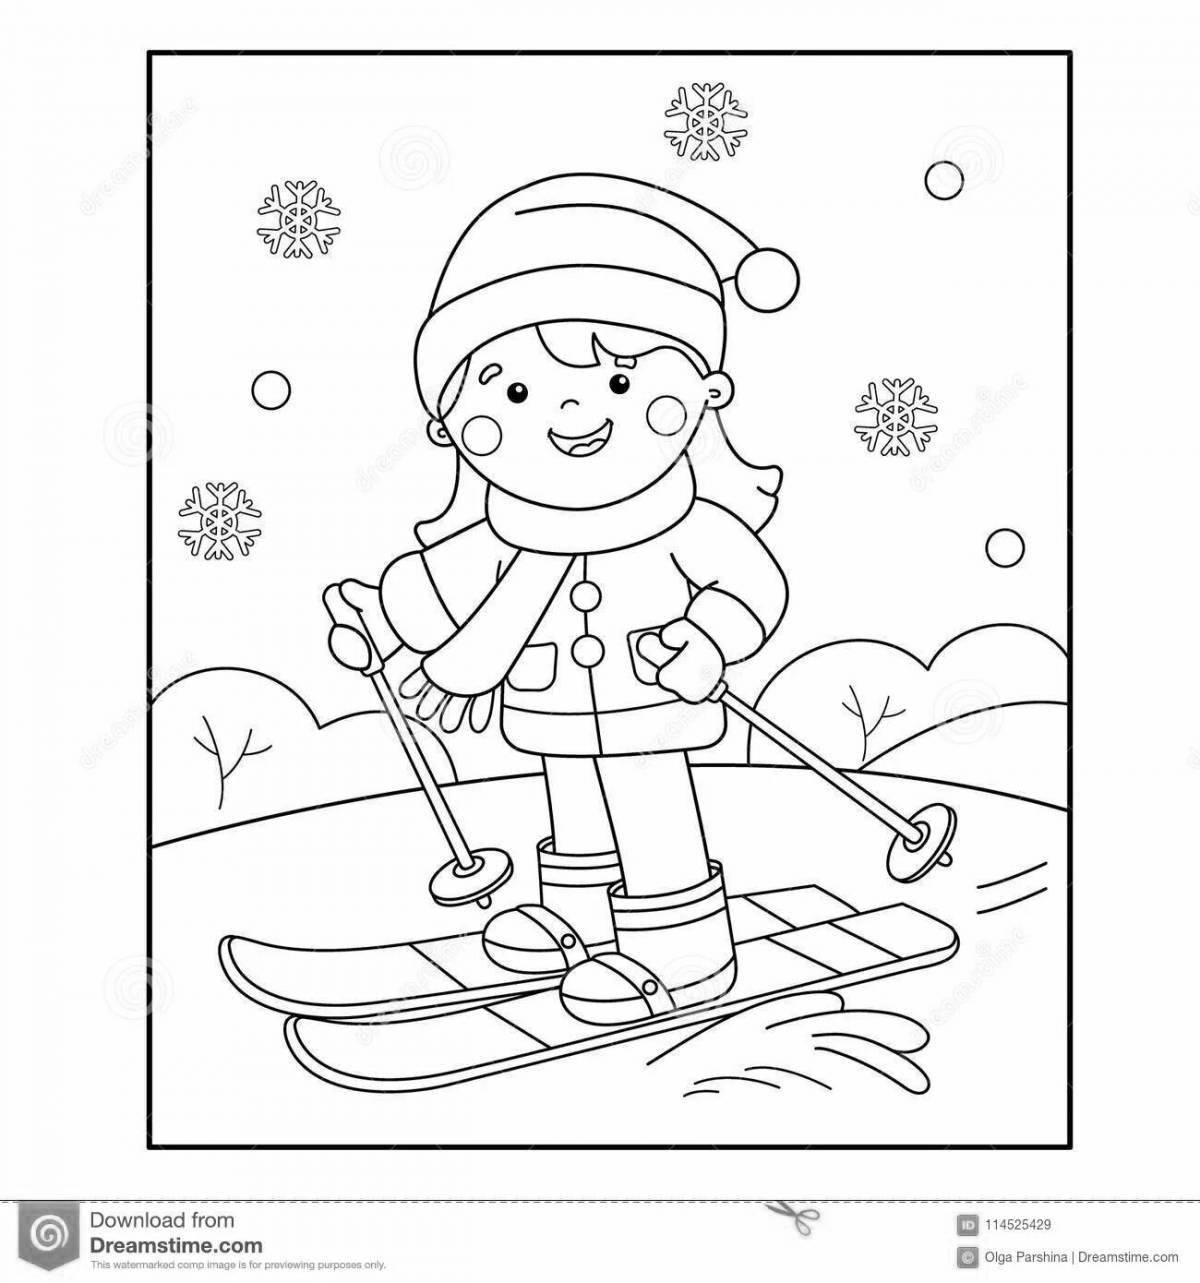 Bright sports coloring book for 4-5 year olds